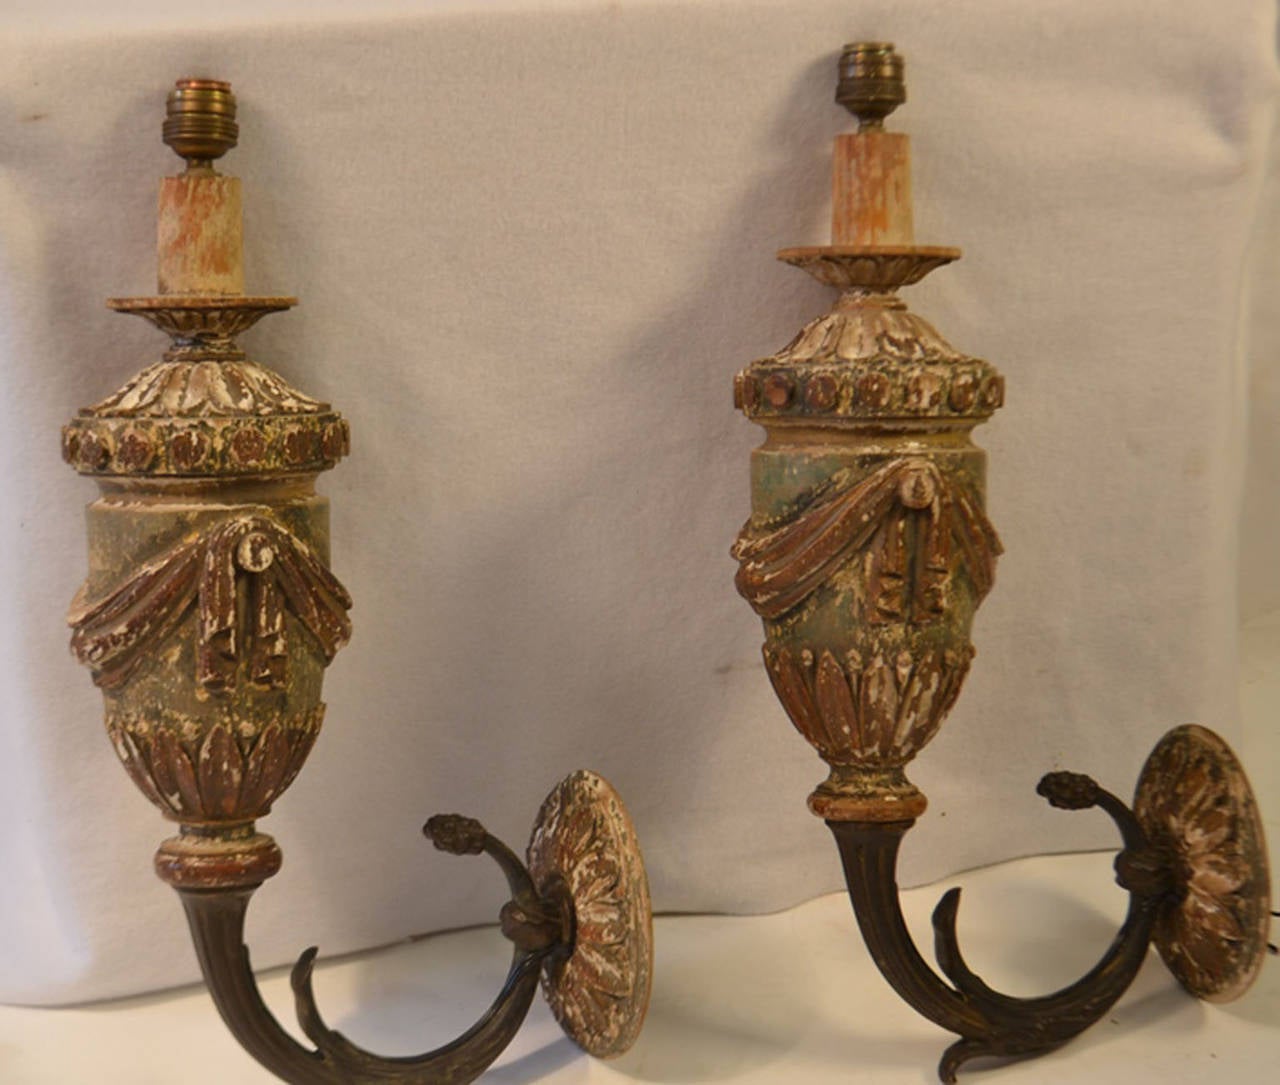  19th century Louis XVI Polychromed sconces with bronze arms. (3 pair, available)